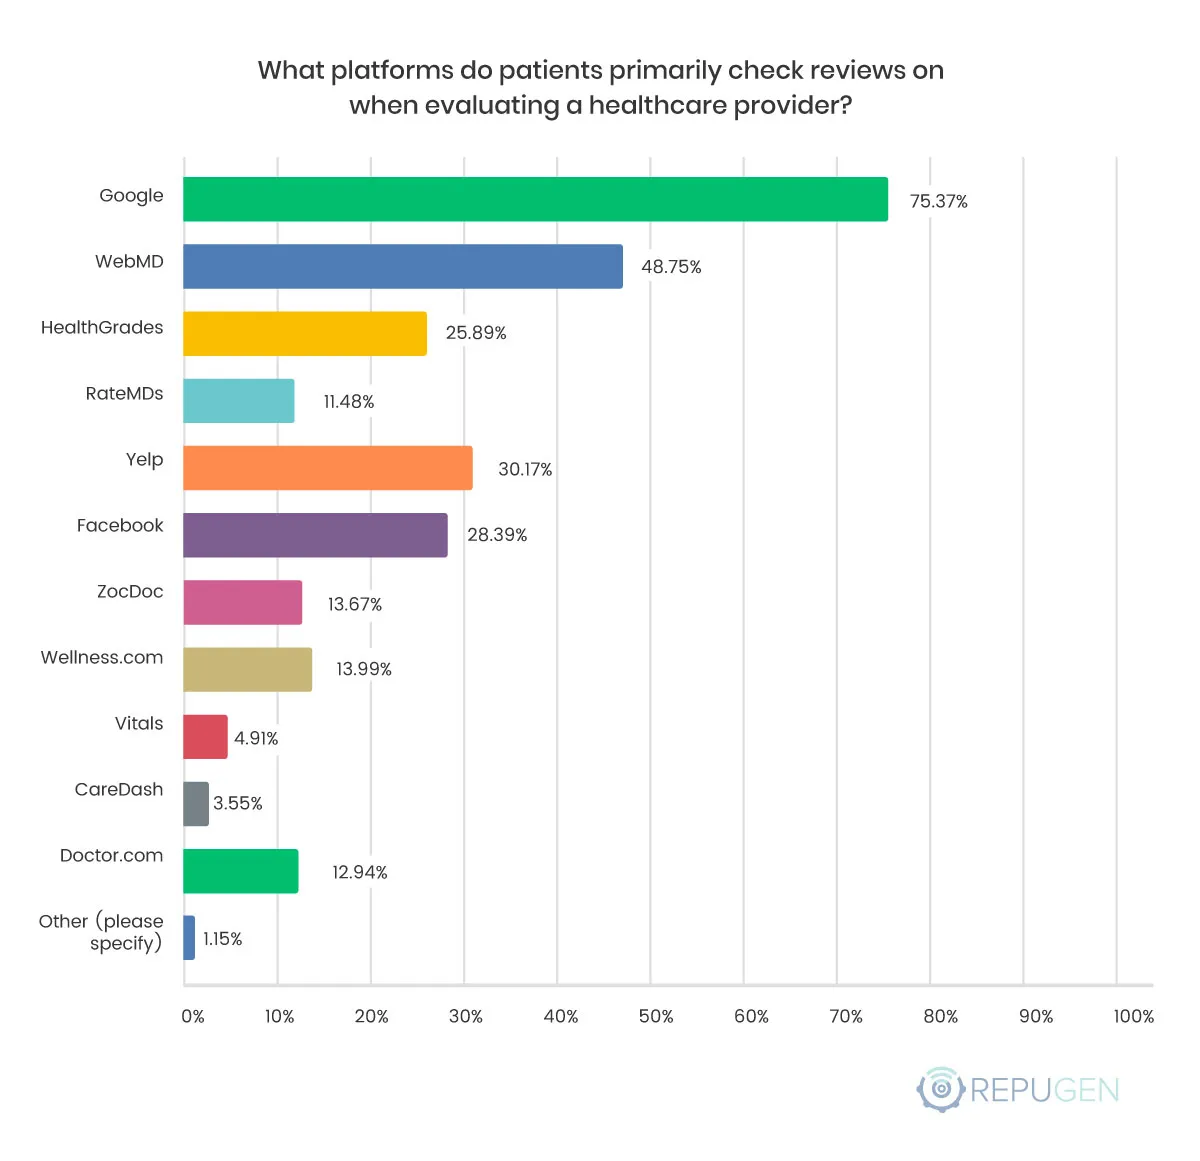 What platforms do patients primarily check reviews on when evaluating a healthcare provider?